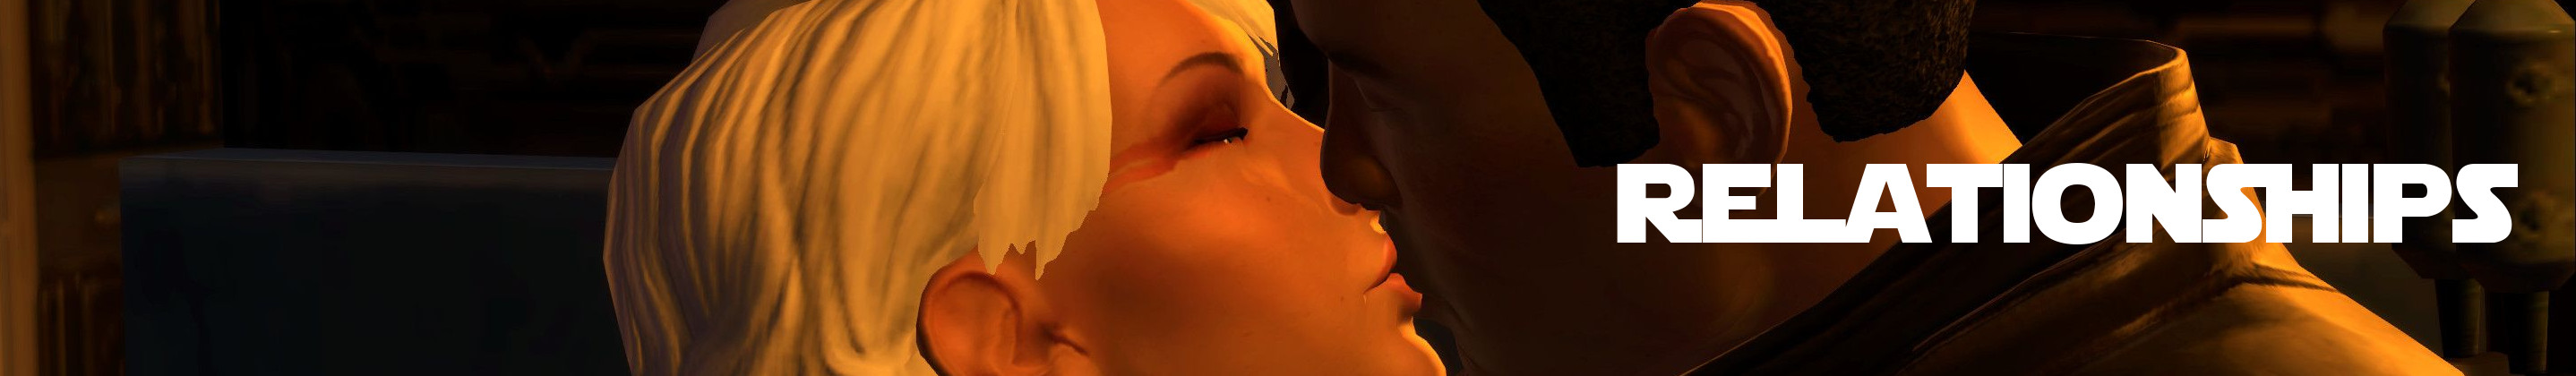 You can choose to develop relationships in SWTOR